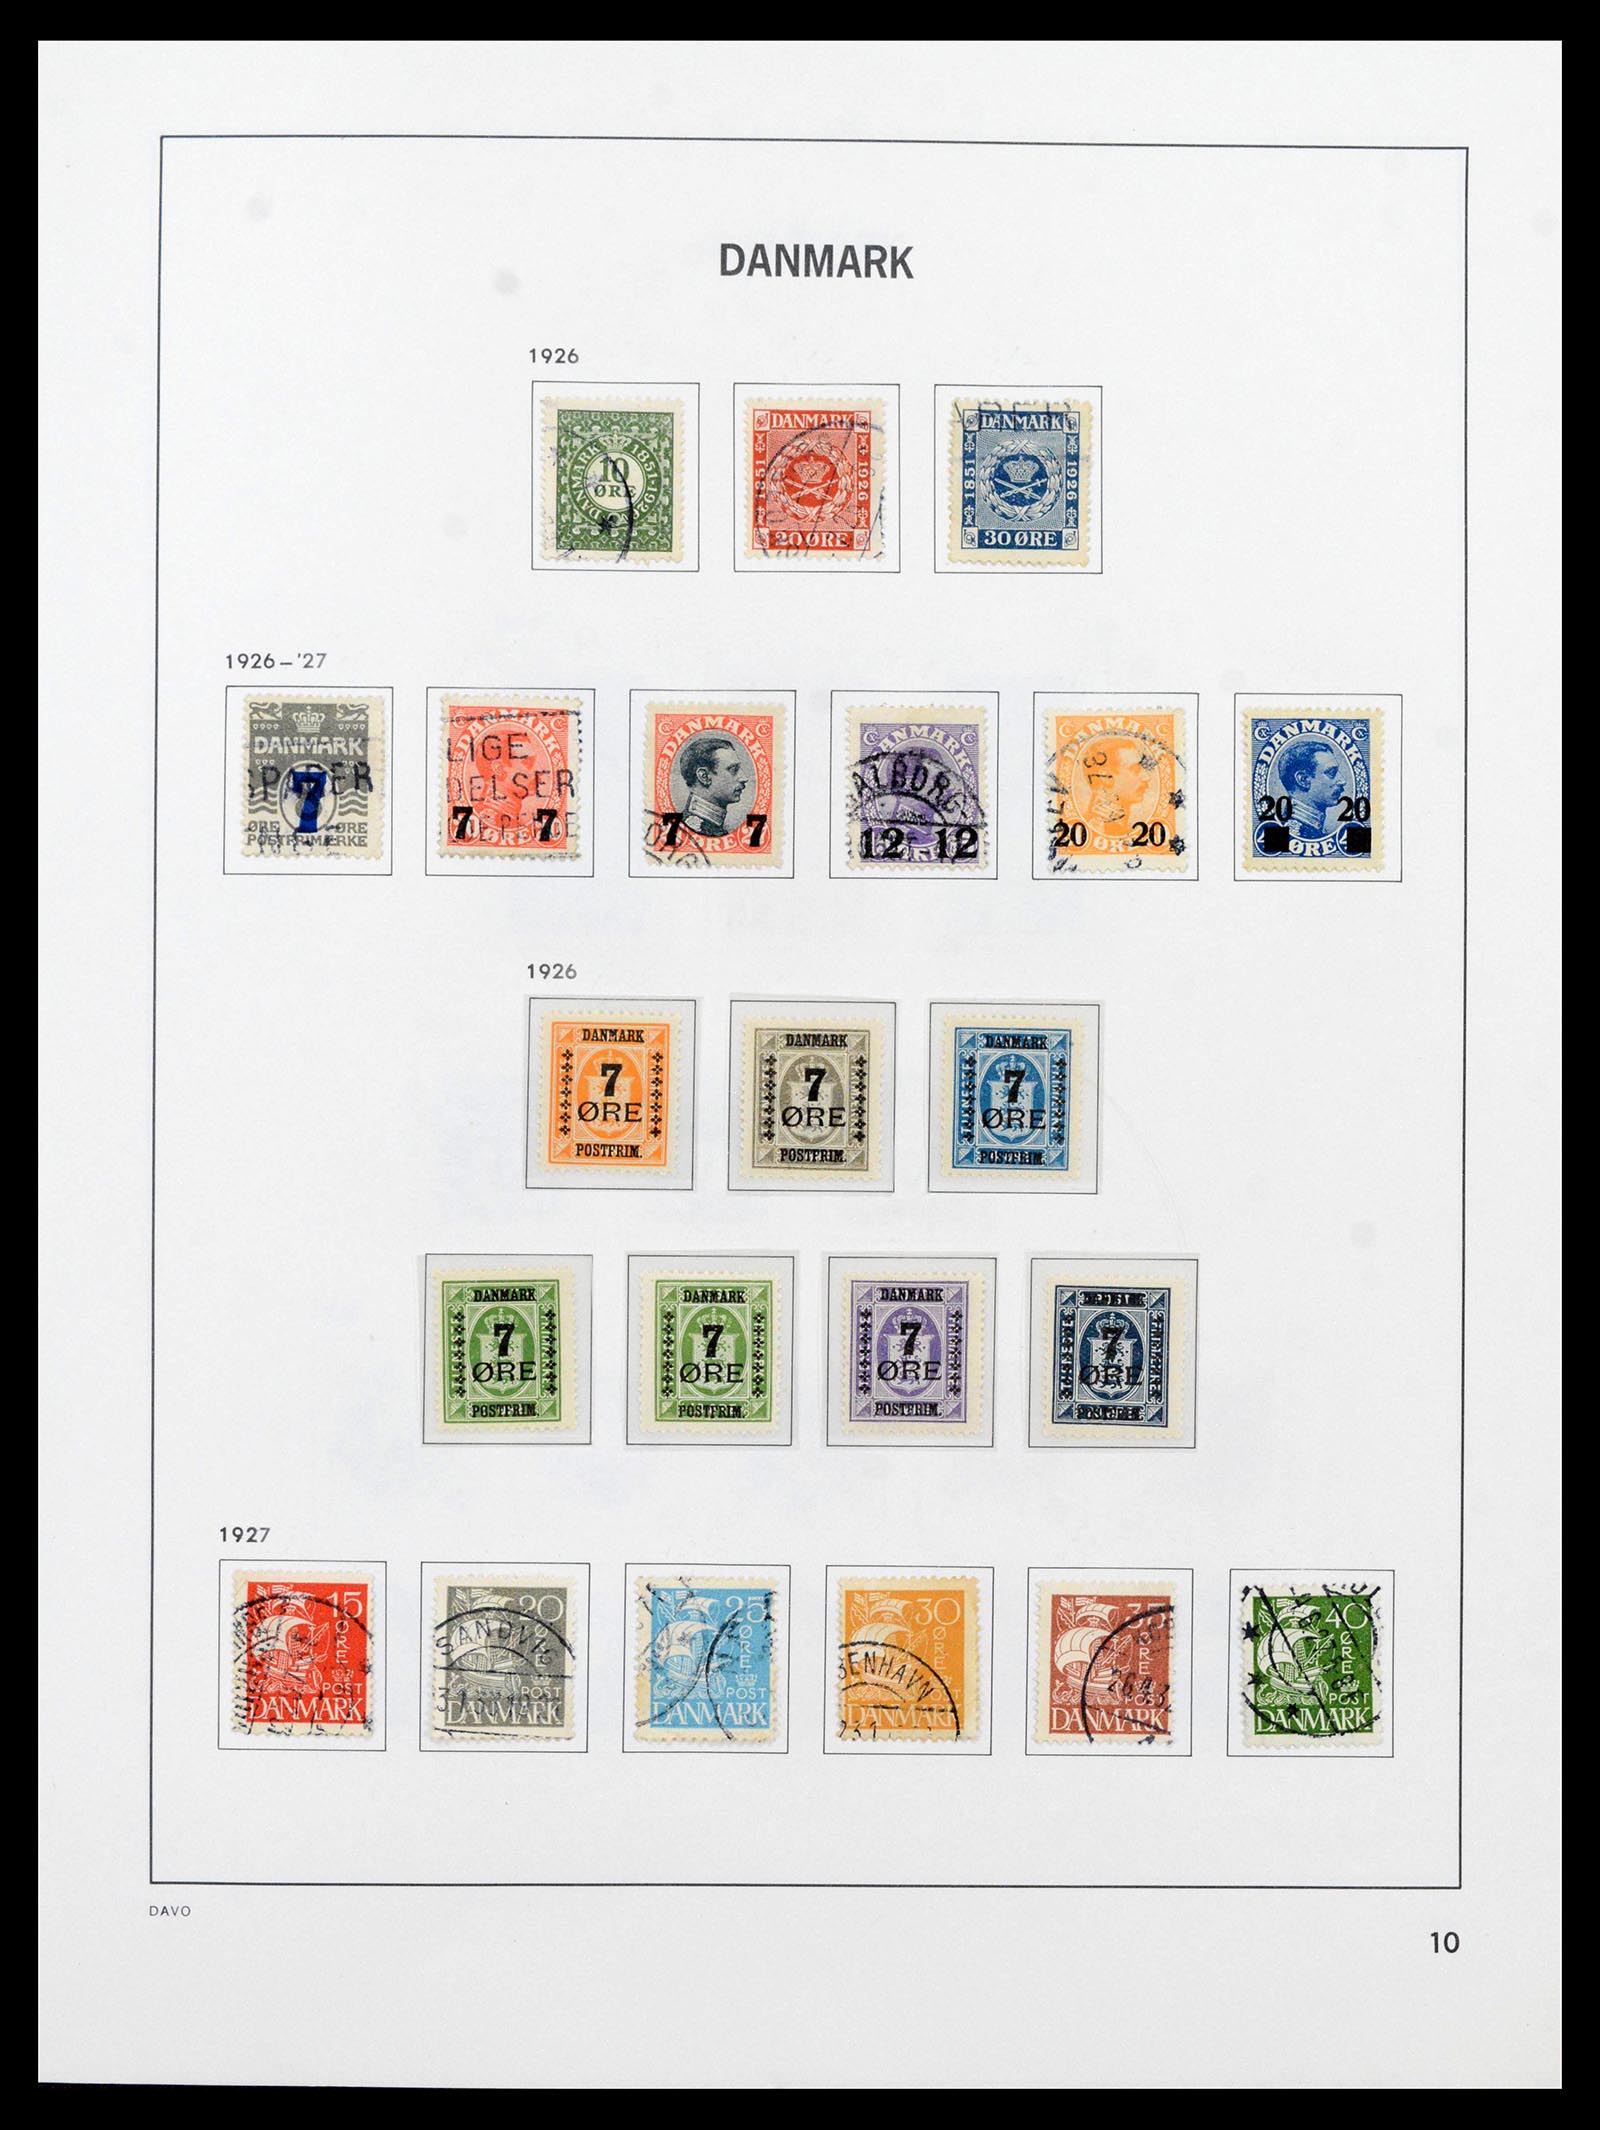 39428 0011 - Stamp collection 39428 Denmark 1851-2019.